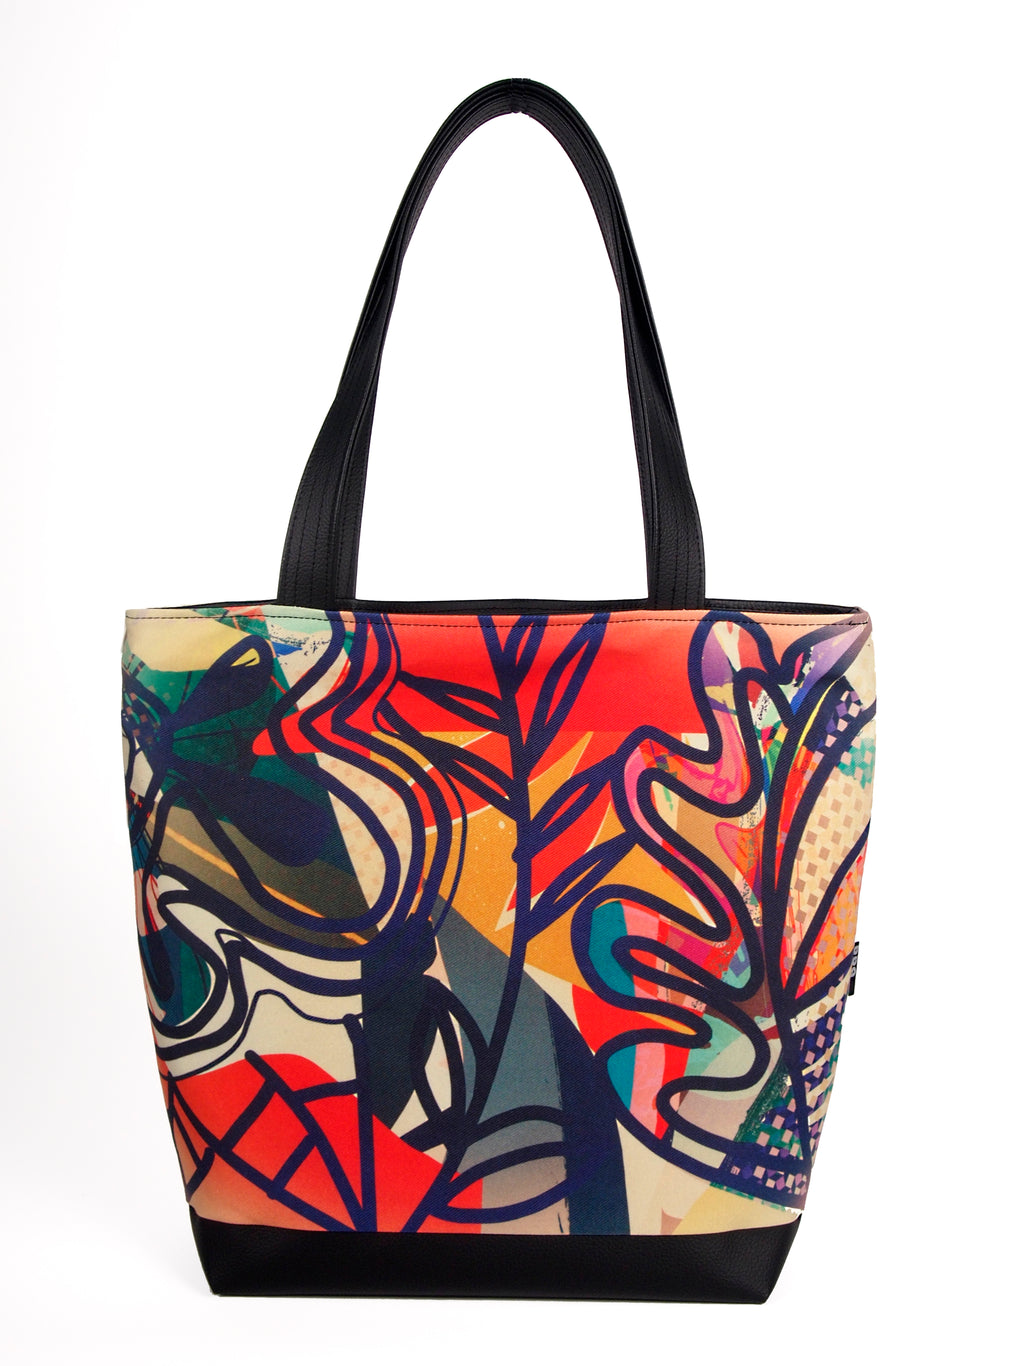 Bardo large tote bag - Summer abstraction - Premium large tote bag from Bardo bag - Just lvabstract, art bag, black, floral, flower, geometric abstraction, gift, green, handemade, large, nature, pink, purple, red, tablet, tote bag, tulips, vegan leather, woman, work bag89.00! Shop now at BARDO ART WORKS